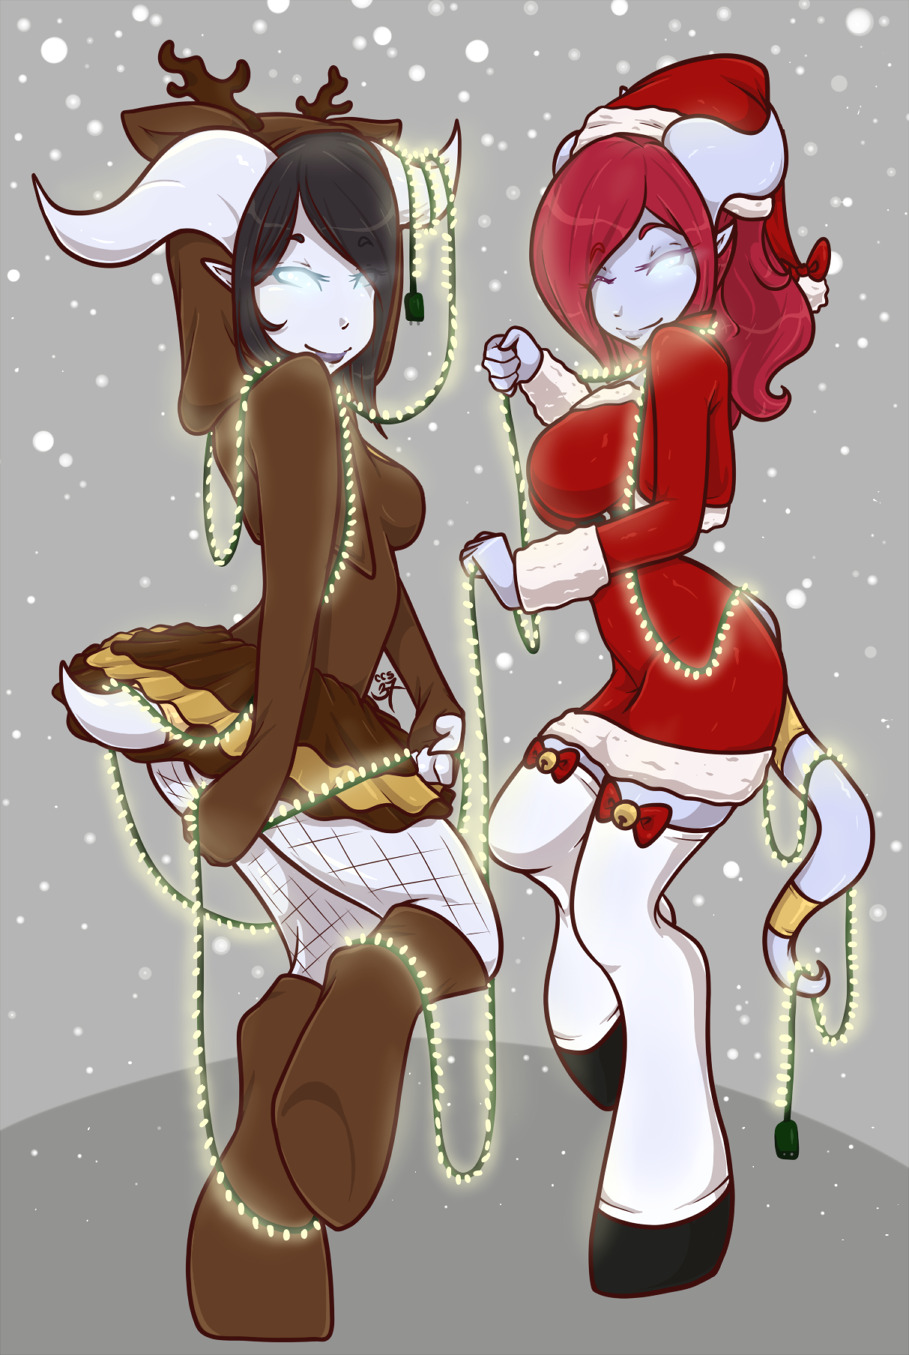 cheshirecatsmile37art:  A Christmas-themed commission for anios25 of their gorgeous